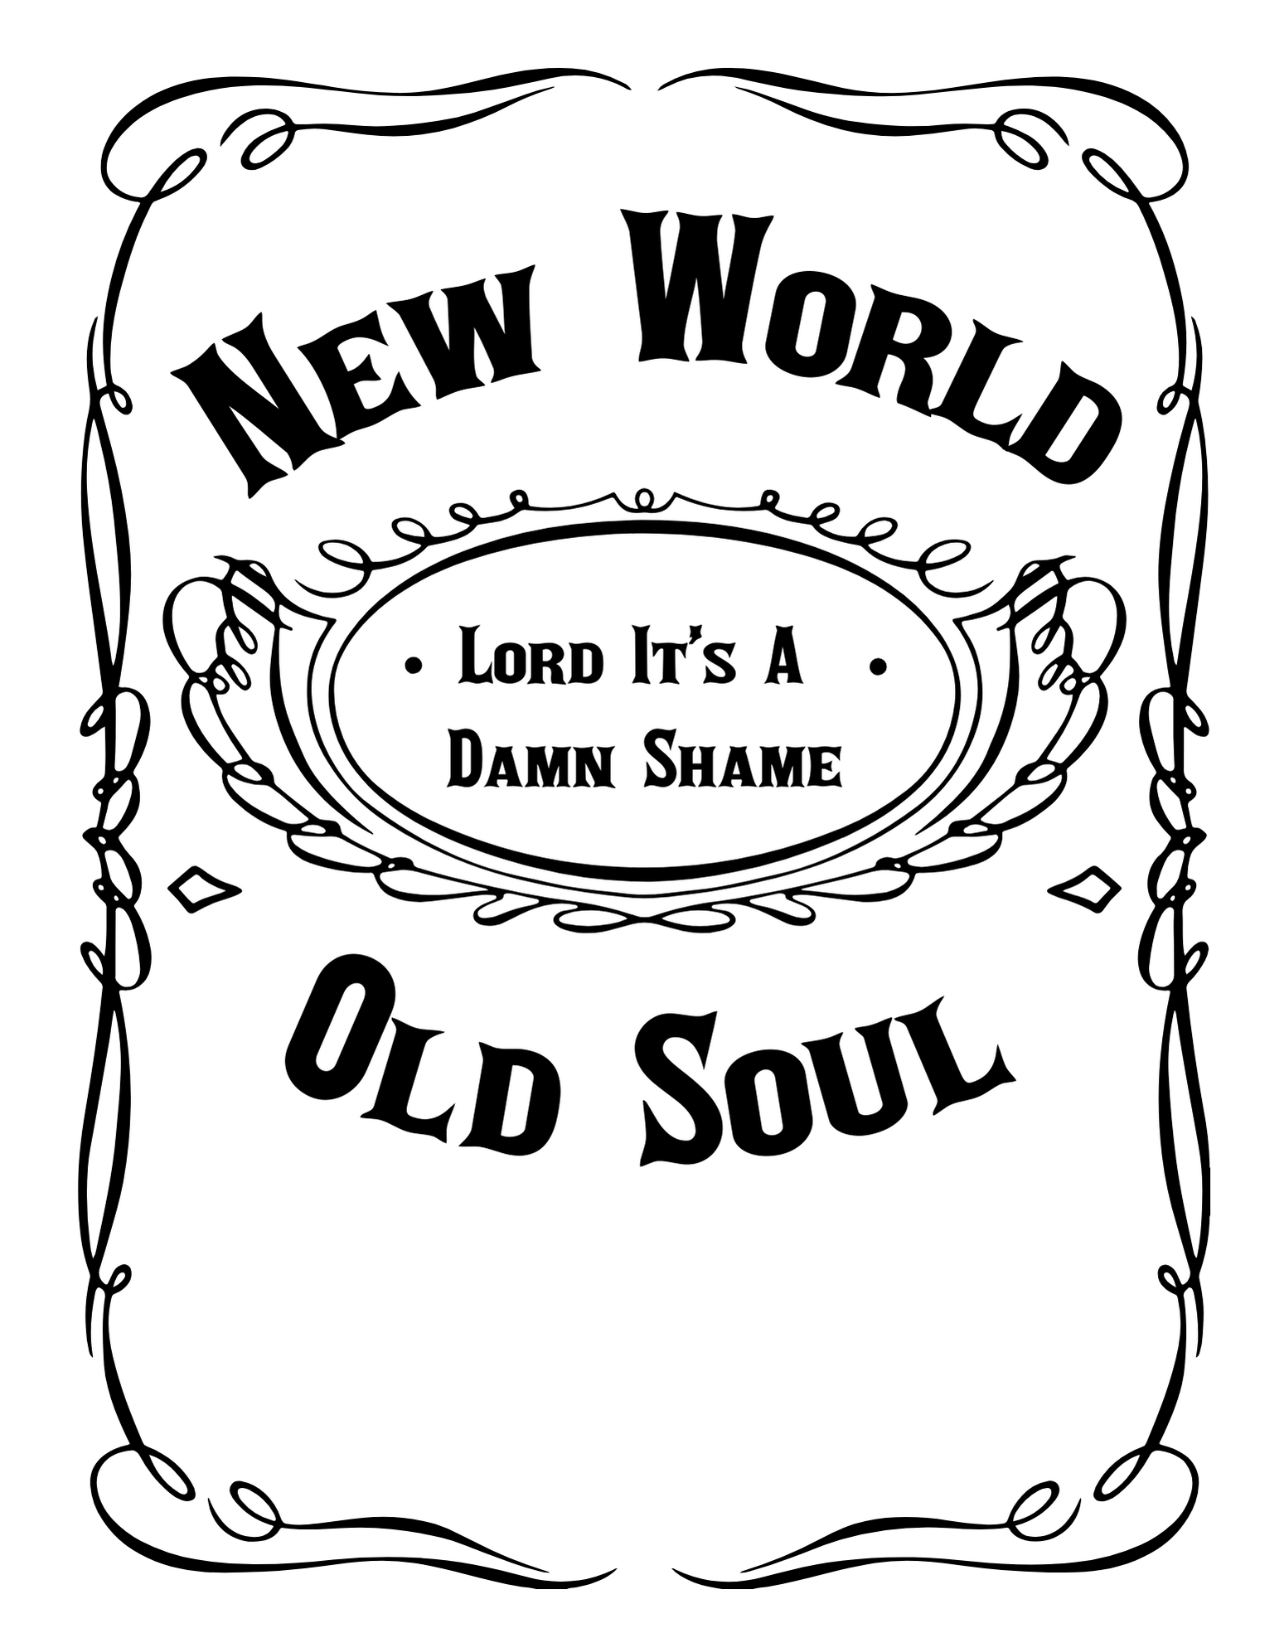 #139 New World Old Soul Lord It's a Damn Shame